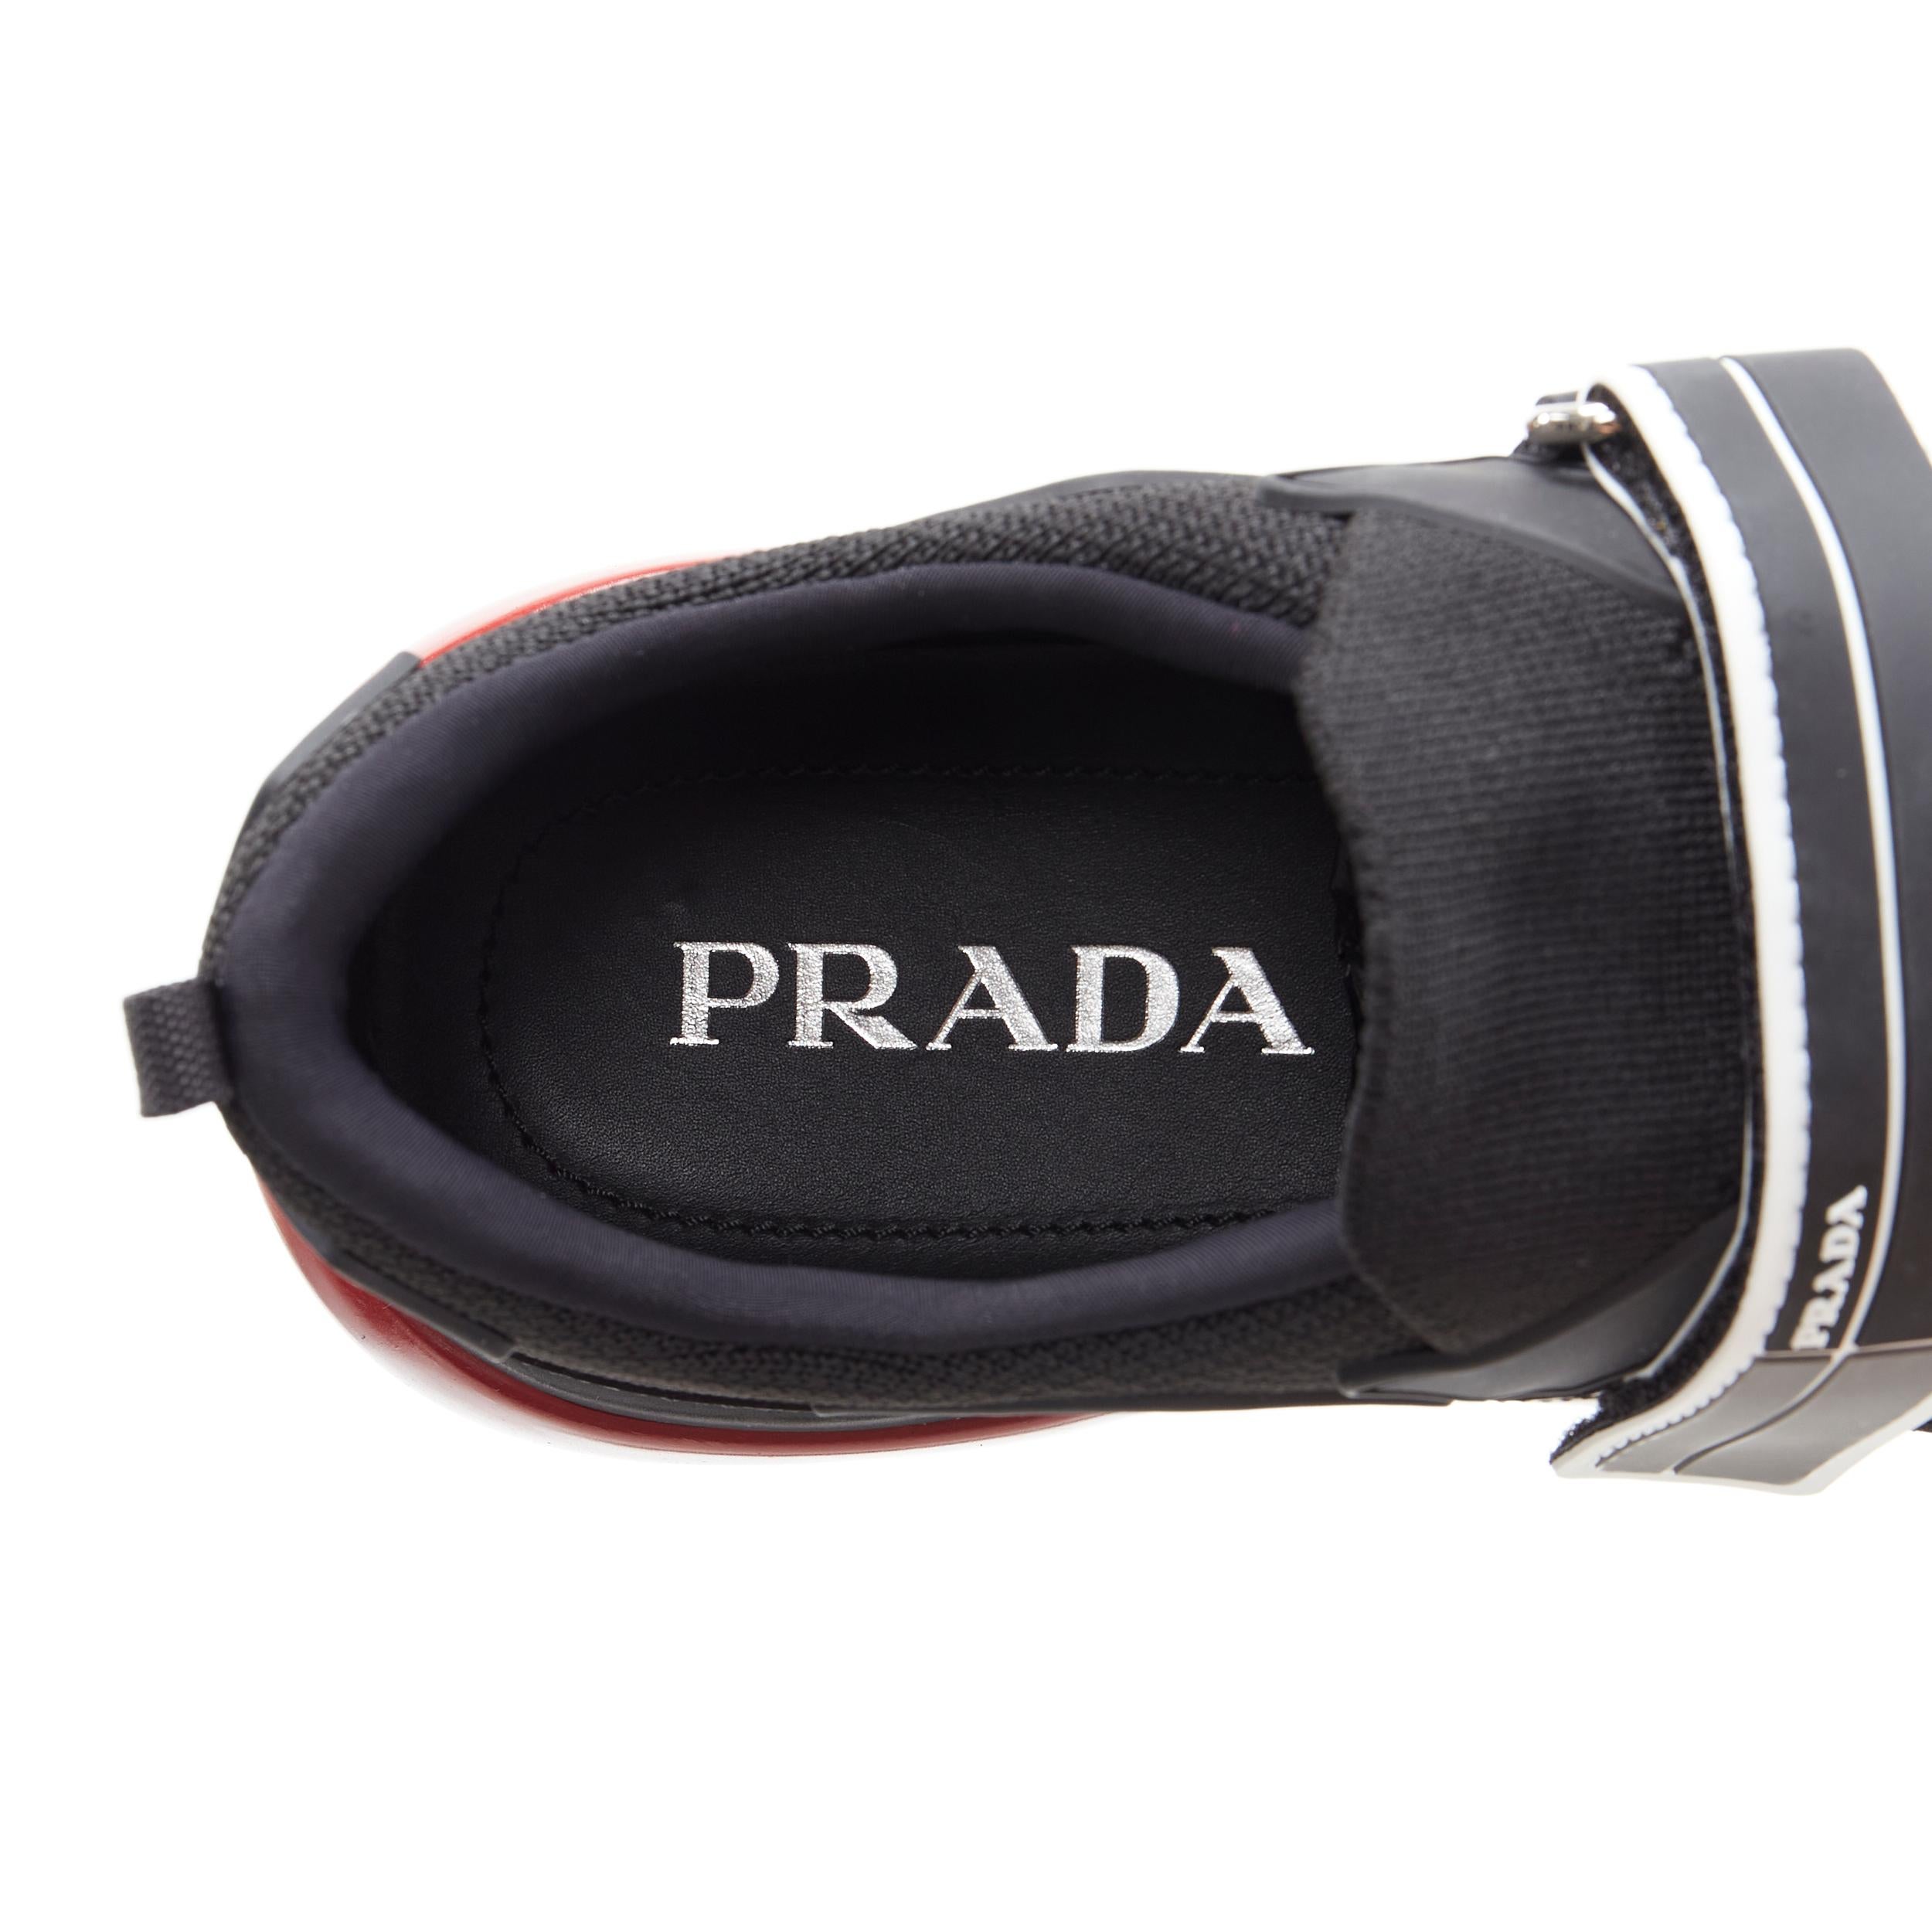 new PRADA Cloudbust black red logo rubber strapped low top sneakers UK7 US8 EU41 3